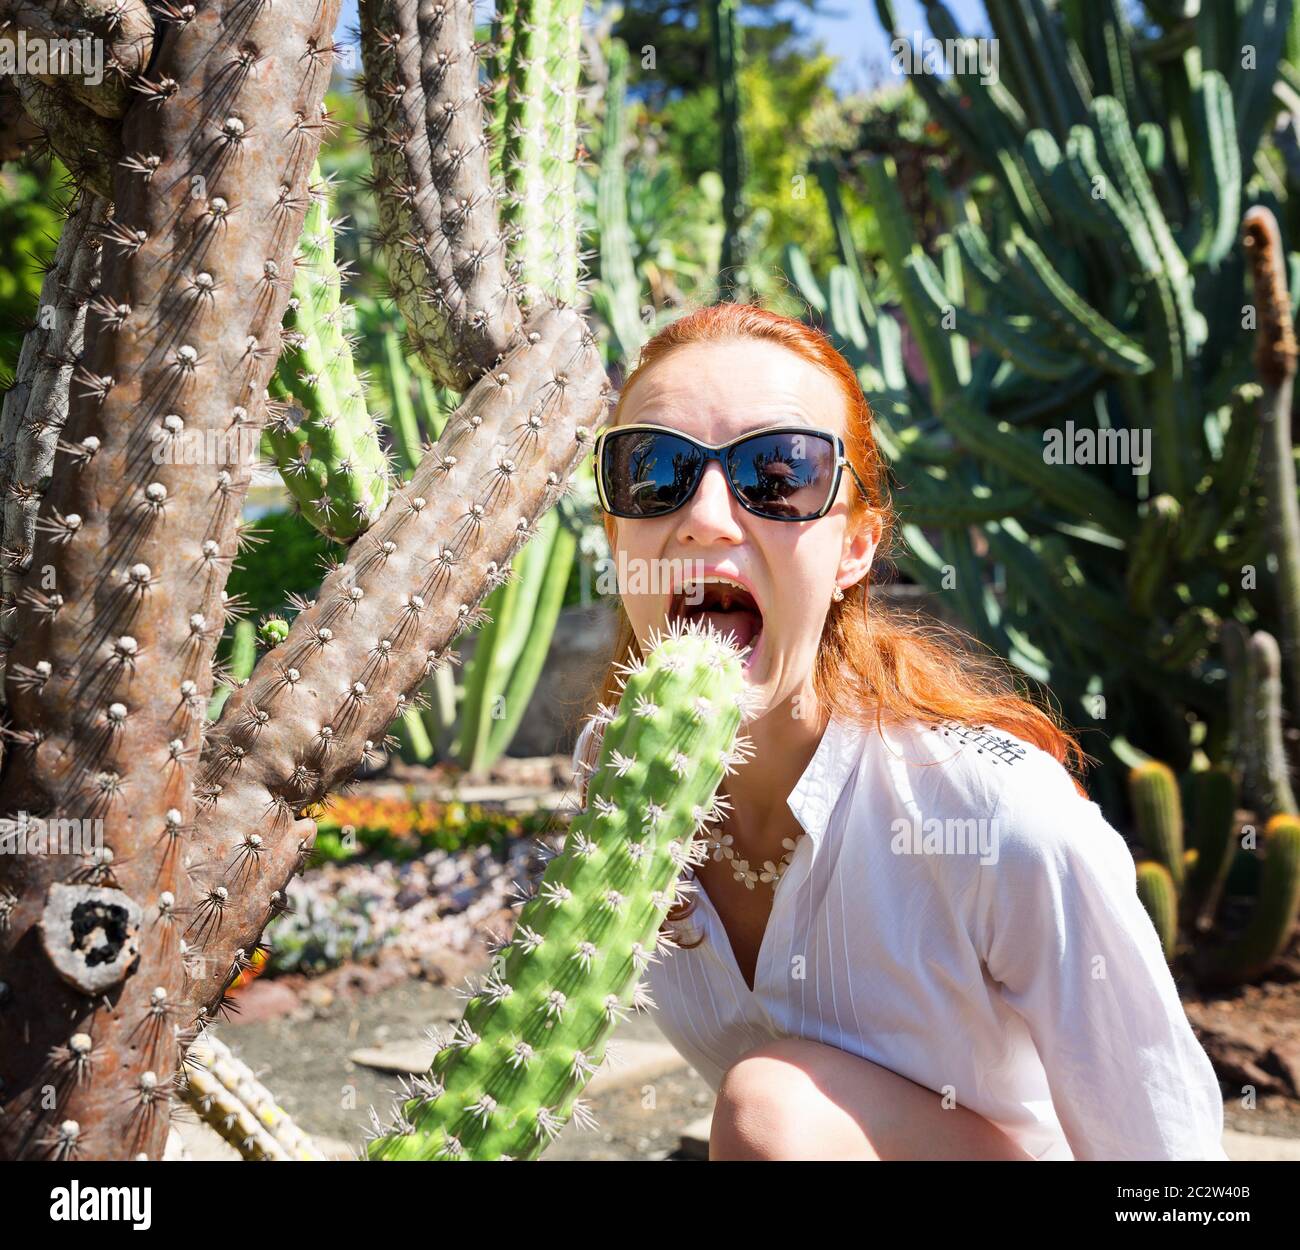 Woman in sun glasses bites cactus in the garden, Portugal, Madeira Stock Photo